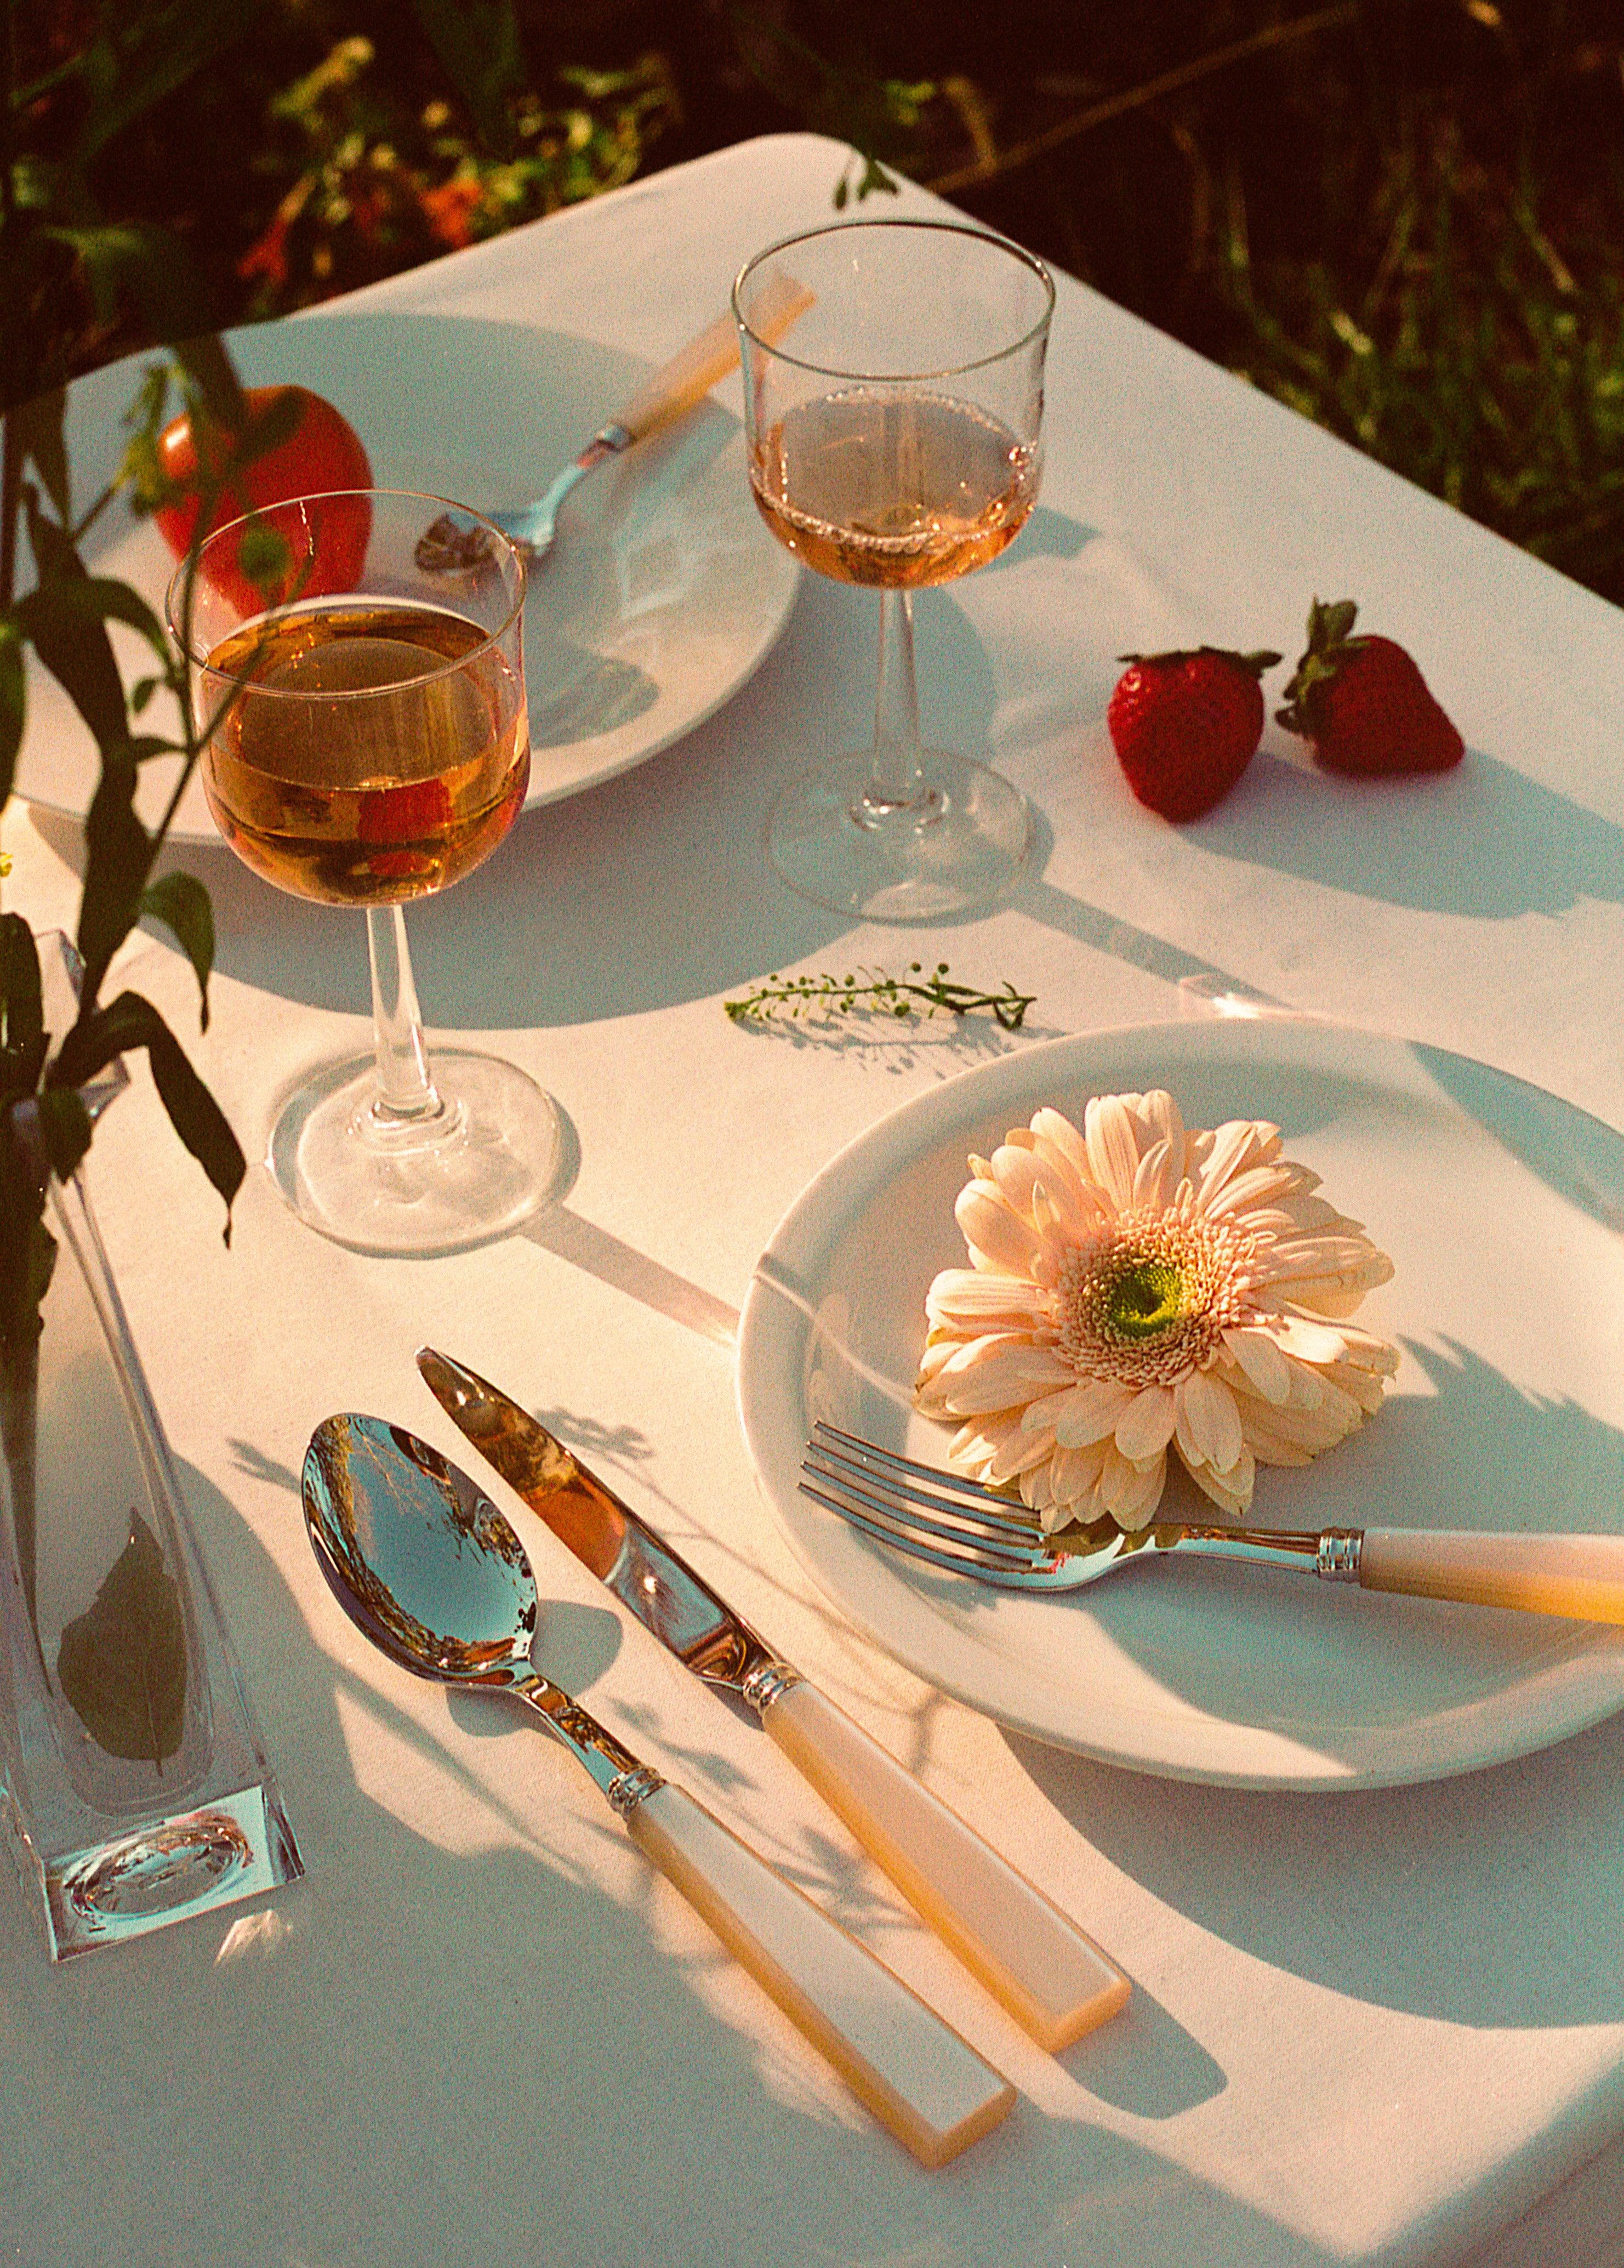 A stylish Pearl Cutlery Set of 5 on a table with a flower, fork, and spoon.